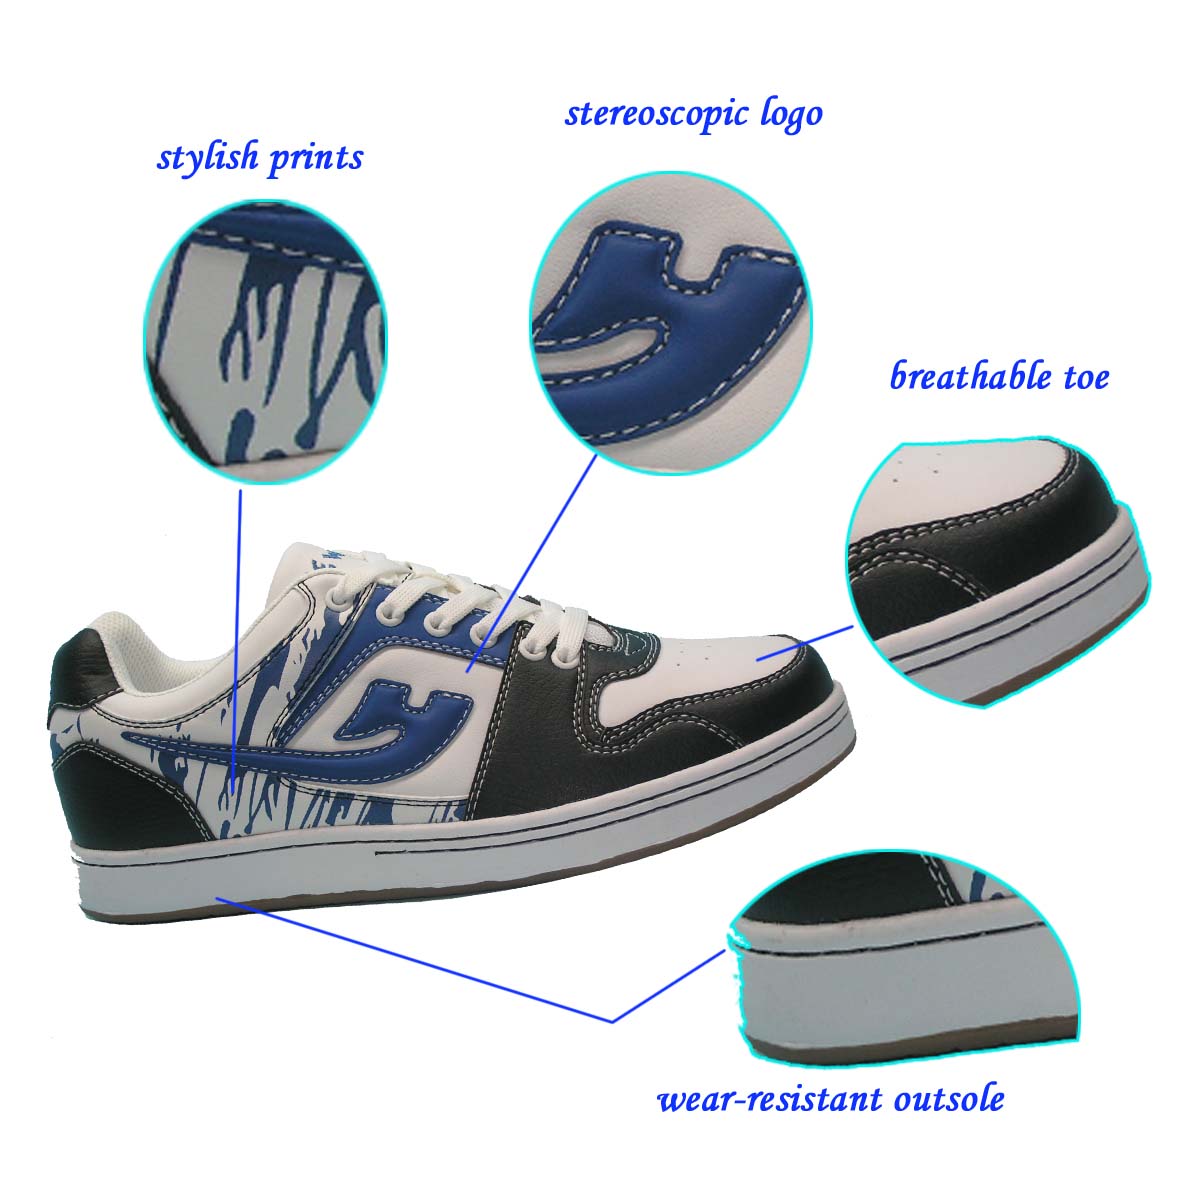 2018 men shoes Latest Product--Fashionable Men Lace Street skate Shoes with Flat Sole